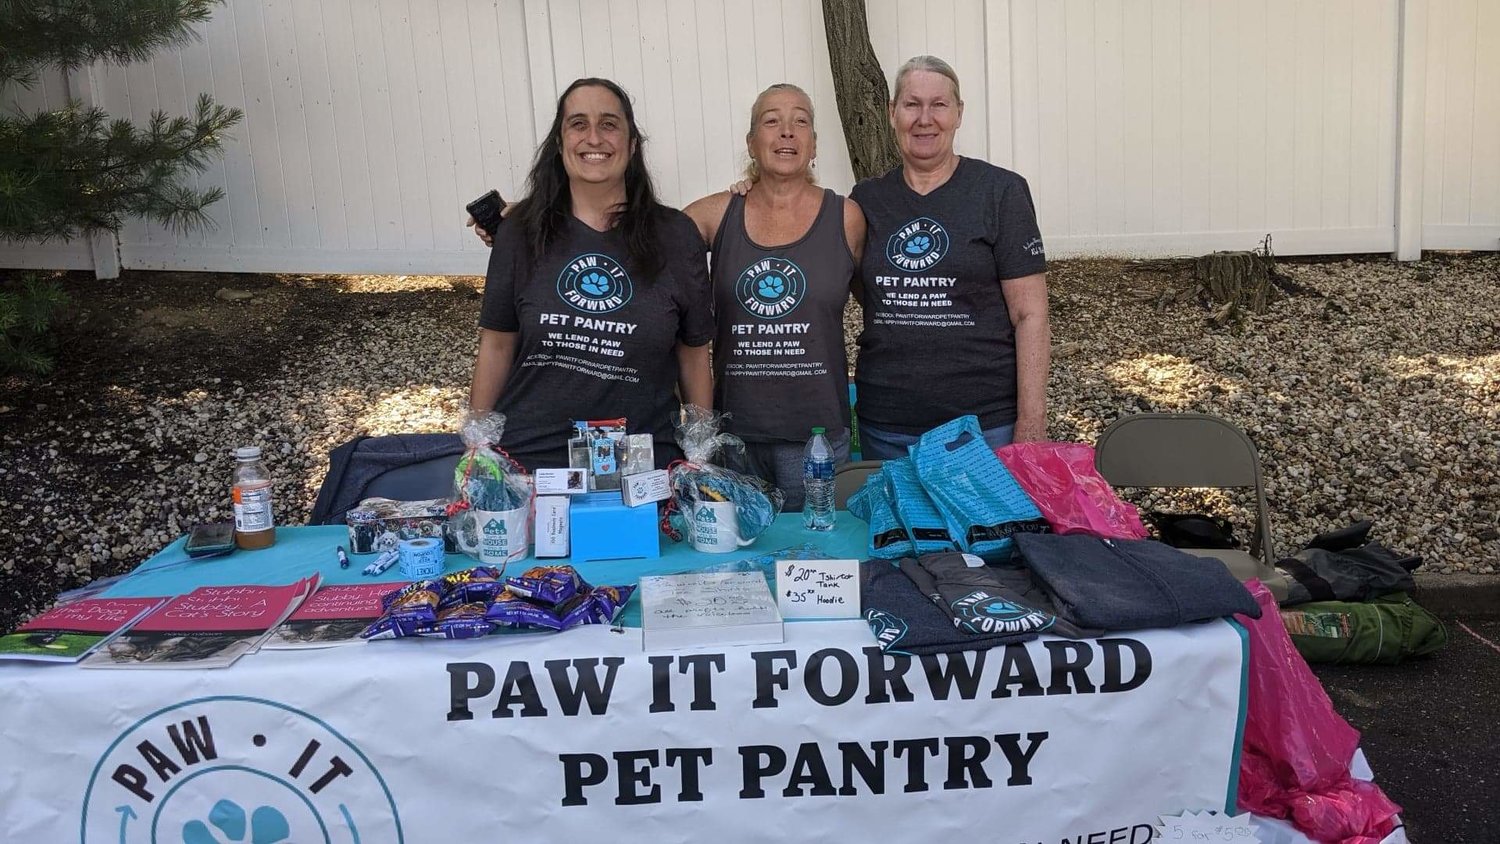 Daniella Scala-Nathan, owner of Paw it Forward, first from left, assessed the main pantry drop-off box with volunteers Linda Guckian and Shari Ehrlich. Scala-Nathan is planning a fundraiser Aug. 20 to help build a new storage shed primarily for cat food.